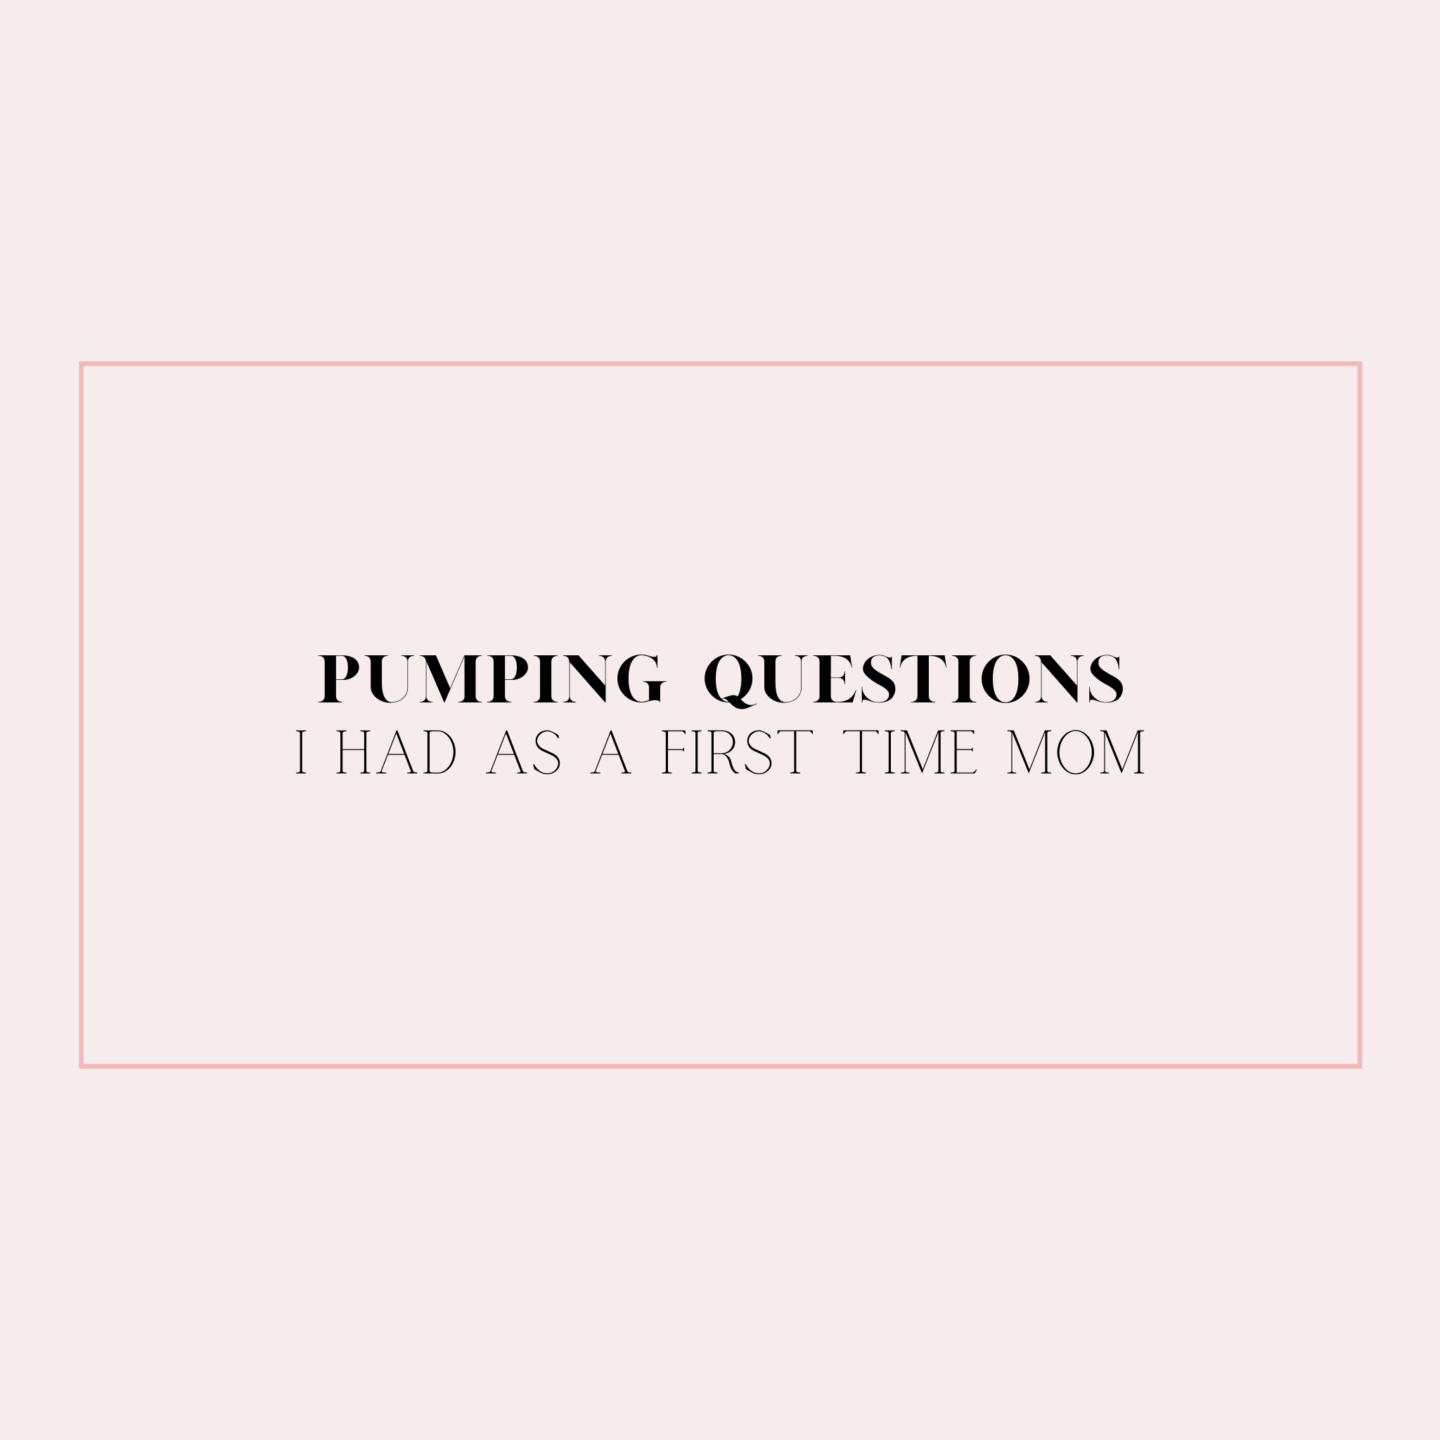 Pumping Questions I Had as a First Time Mom